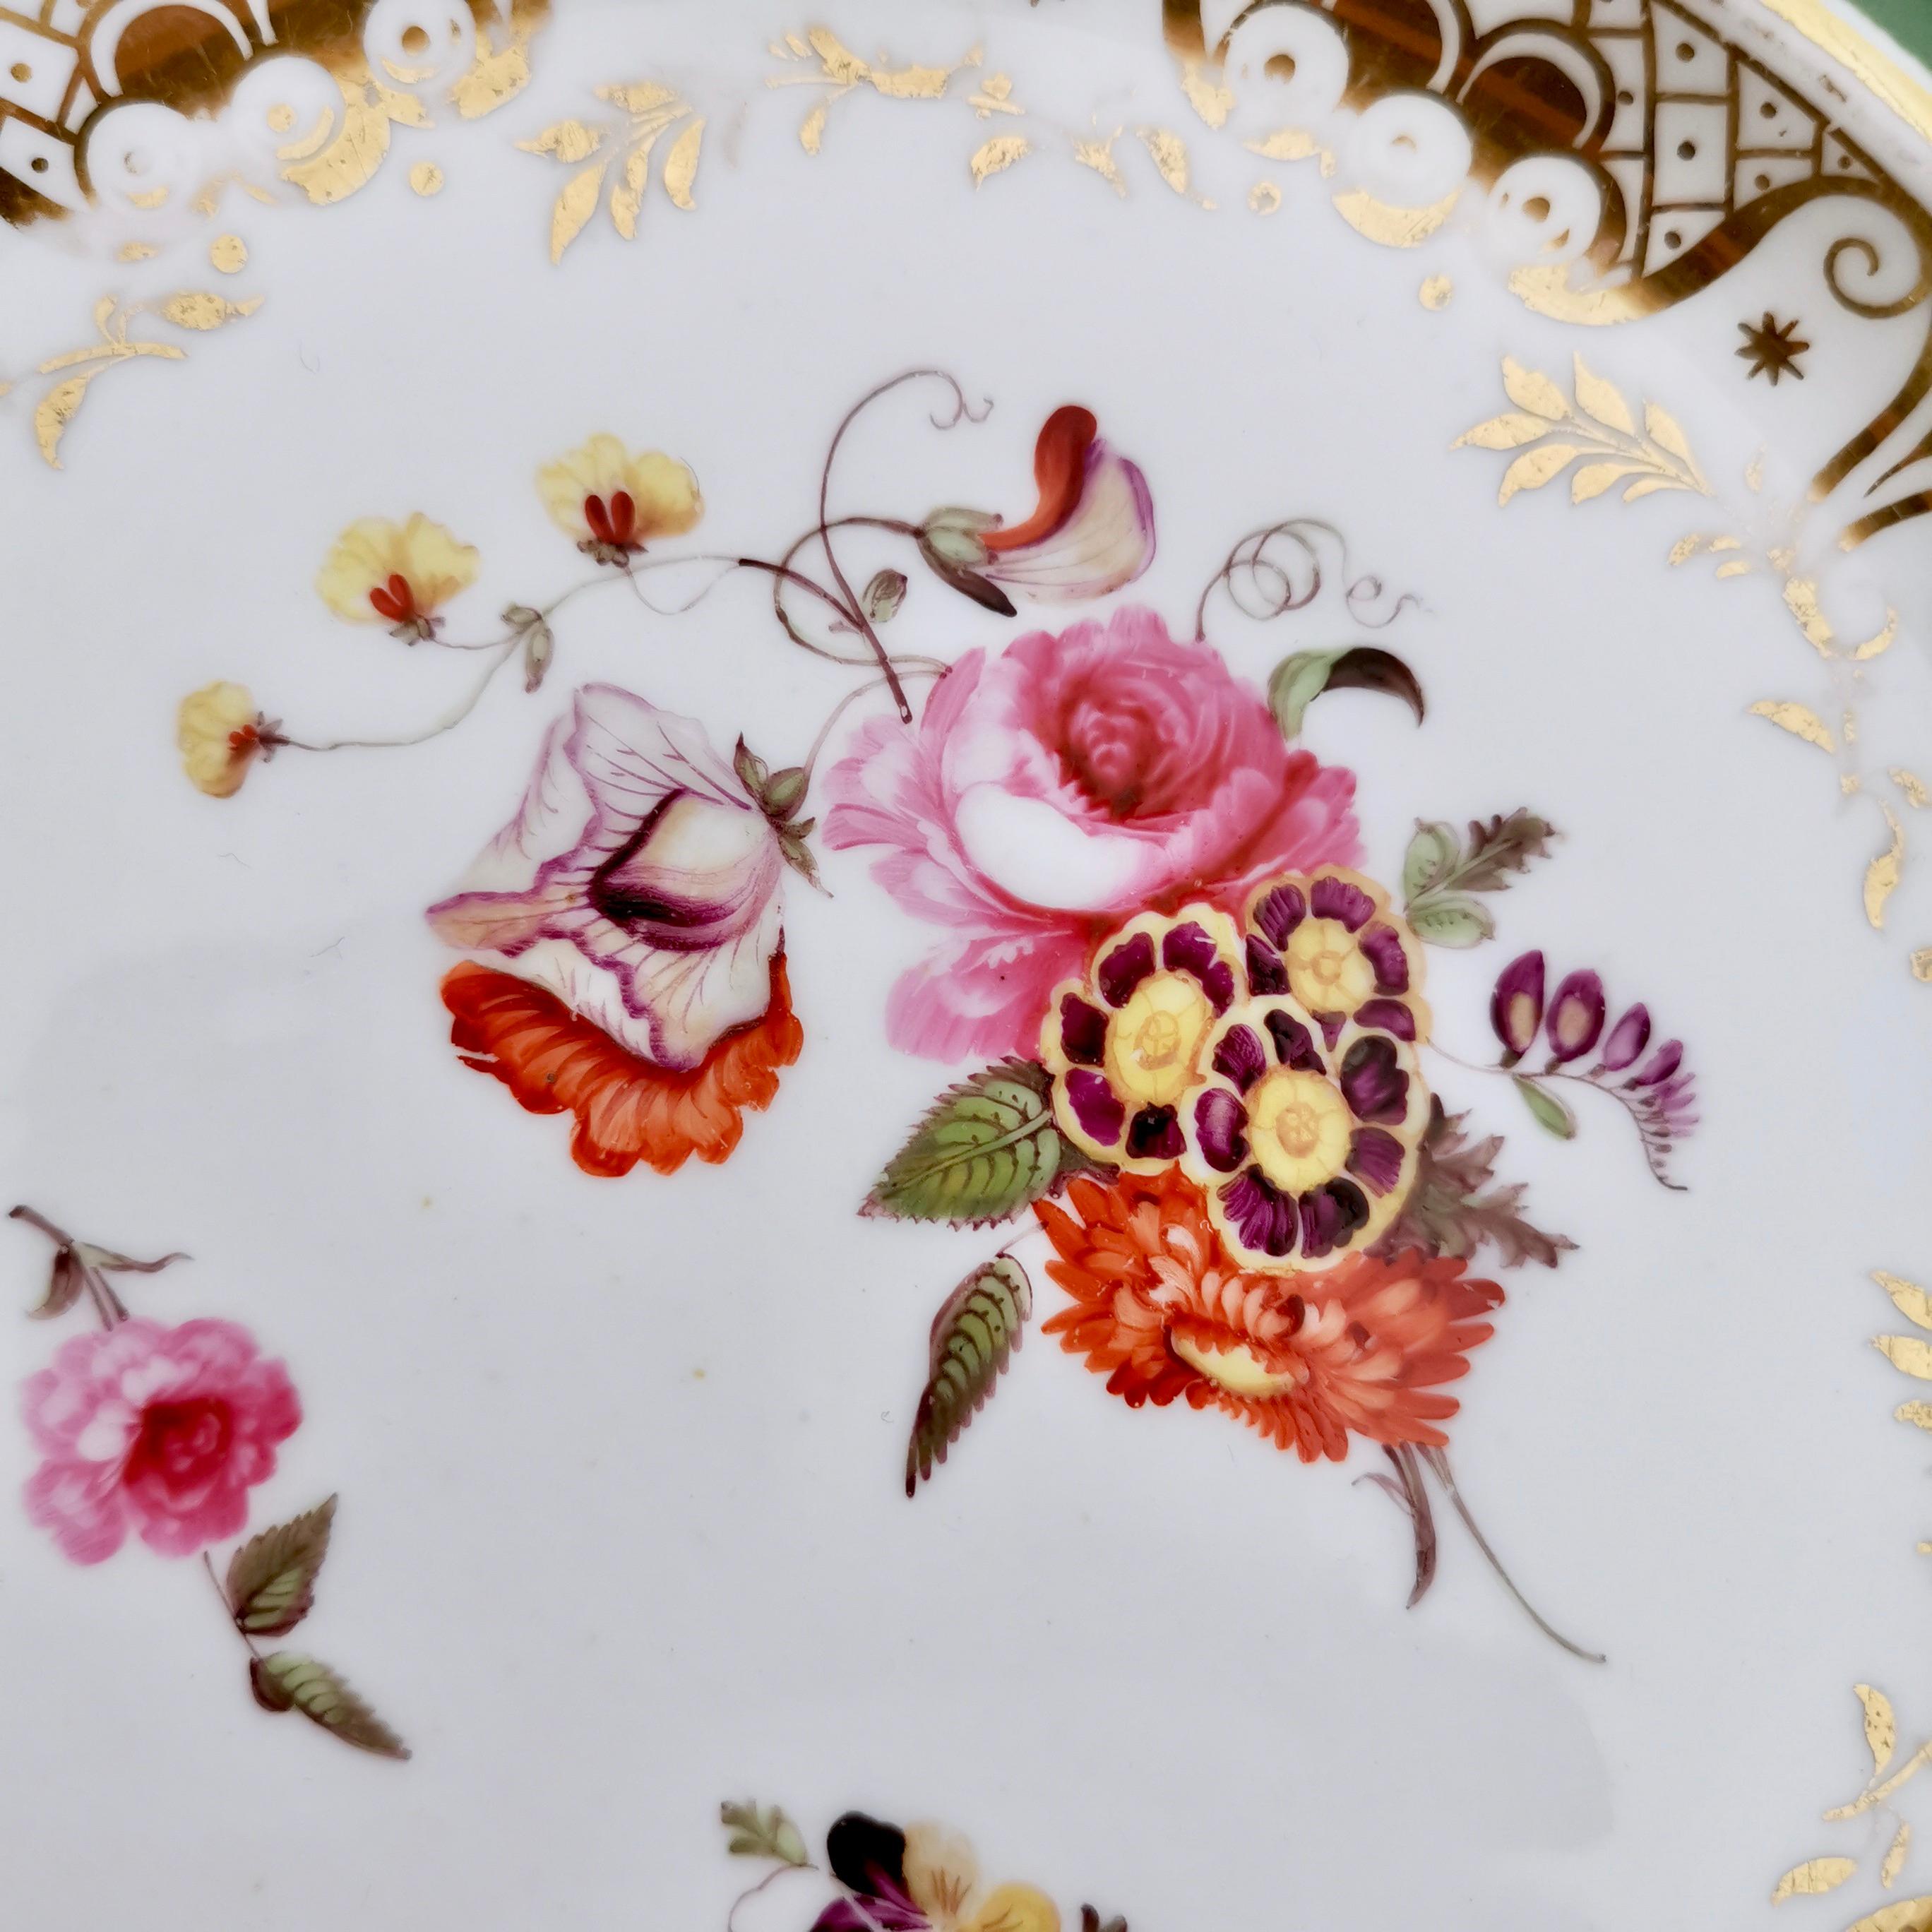 English Ridgway Porcelain Plate, Green with Hand Painted Flowers, Regency, ca 1825